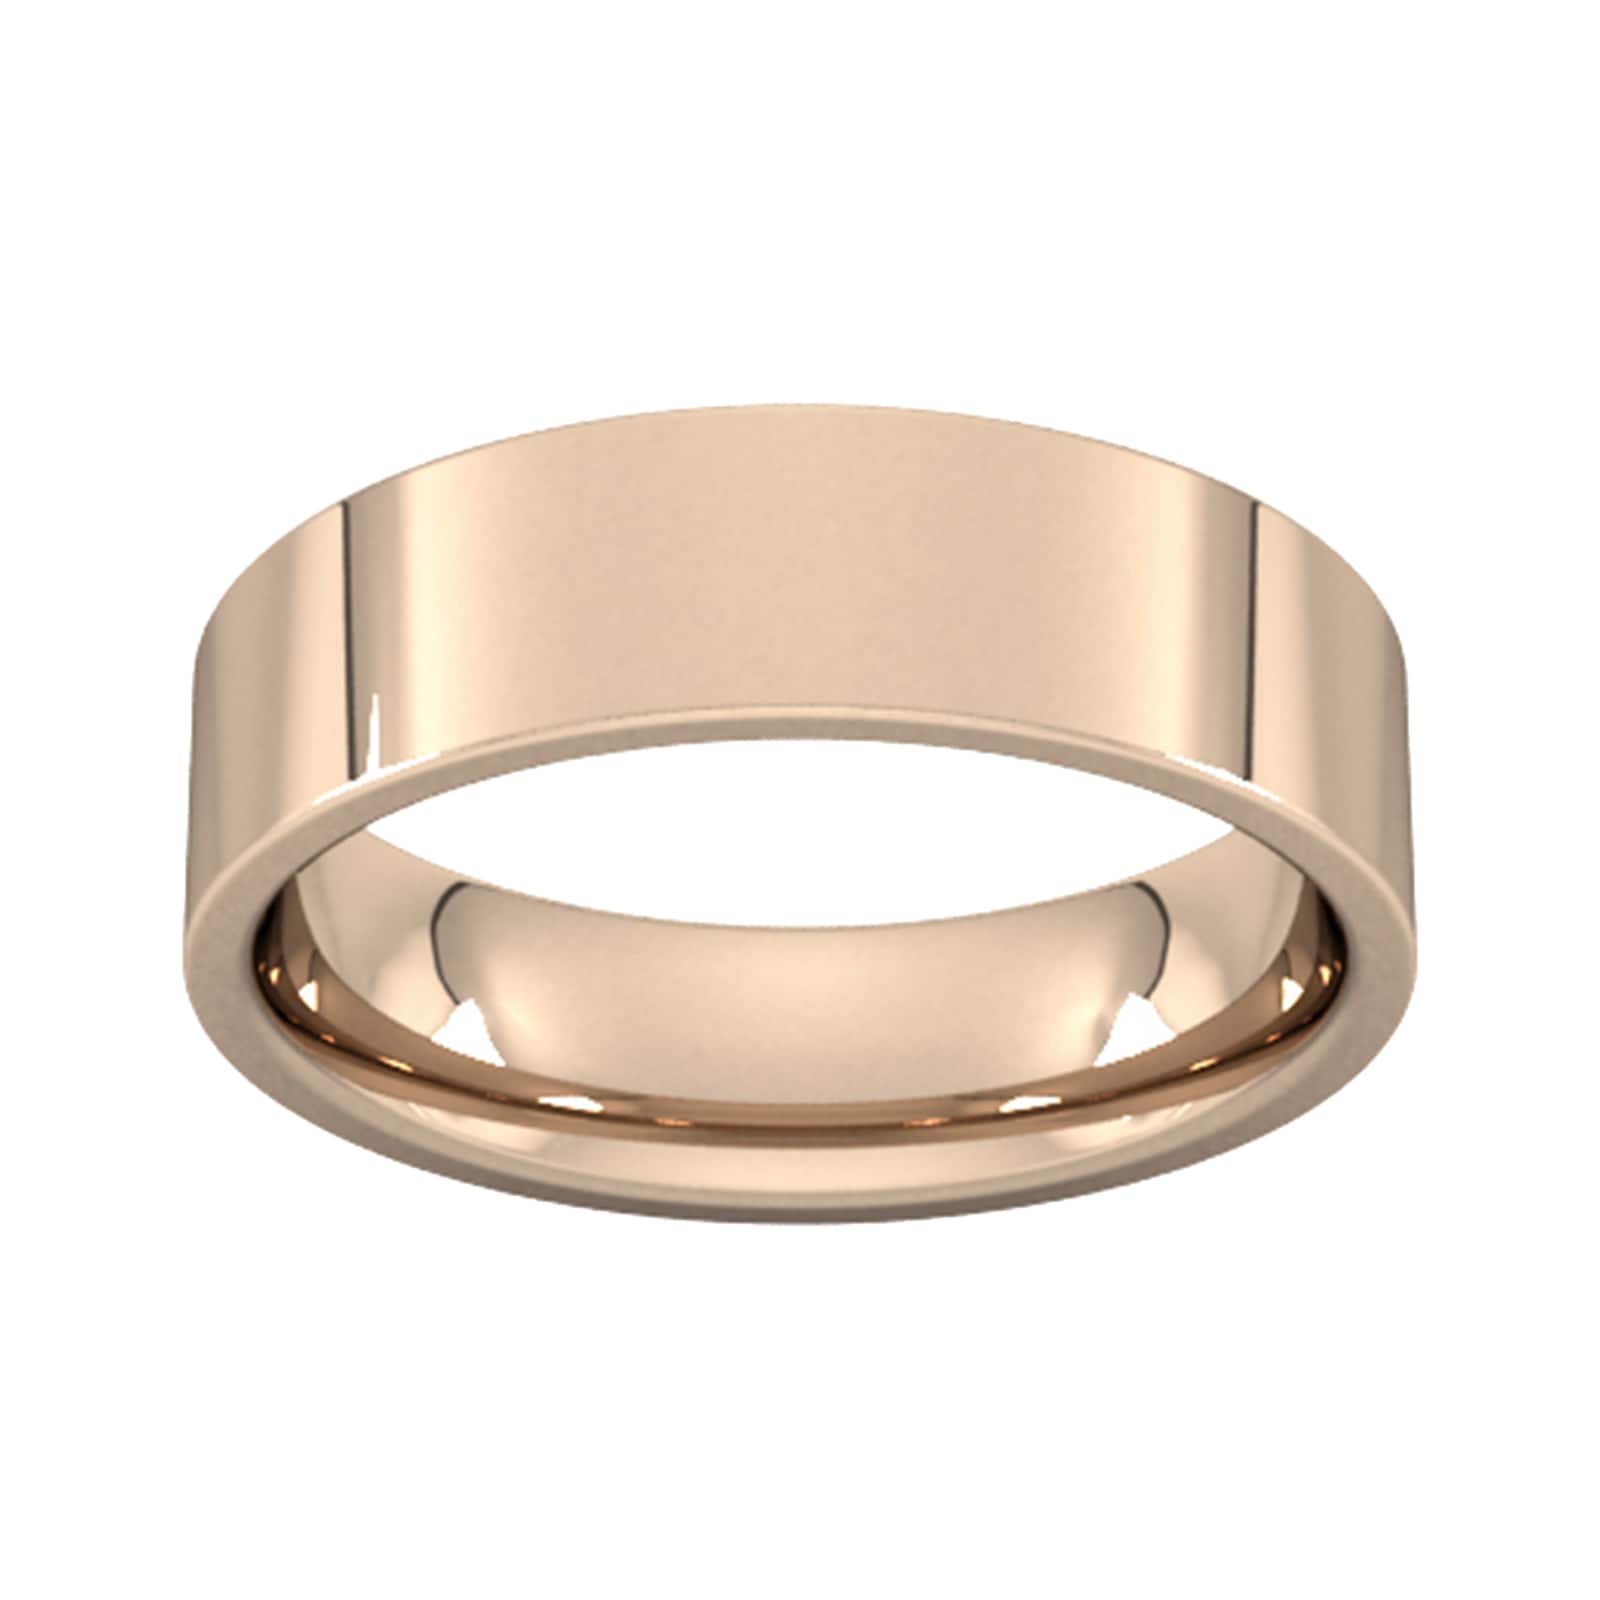 6mm Flat Court Heavy Wedding Ring In 9 Carat Rose Gold - Ring Size Q